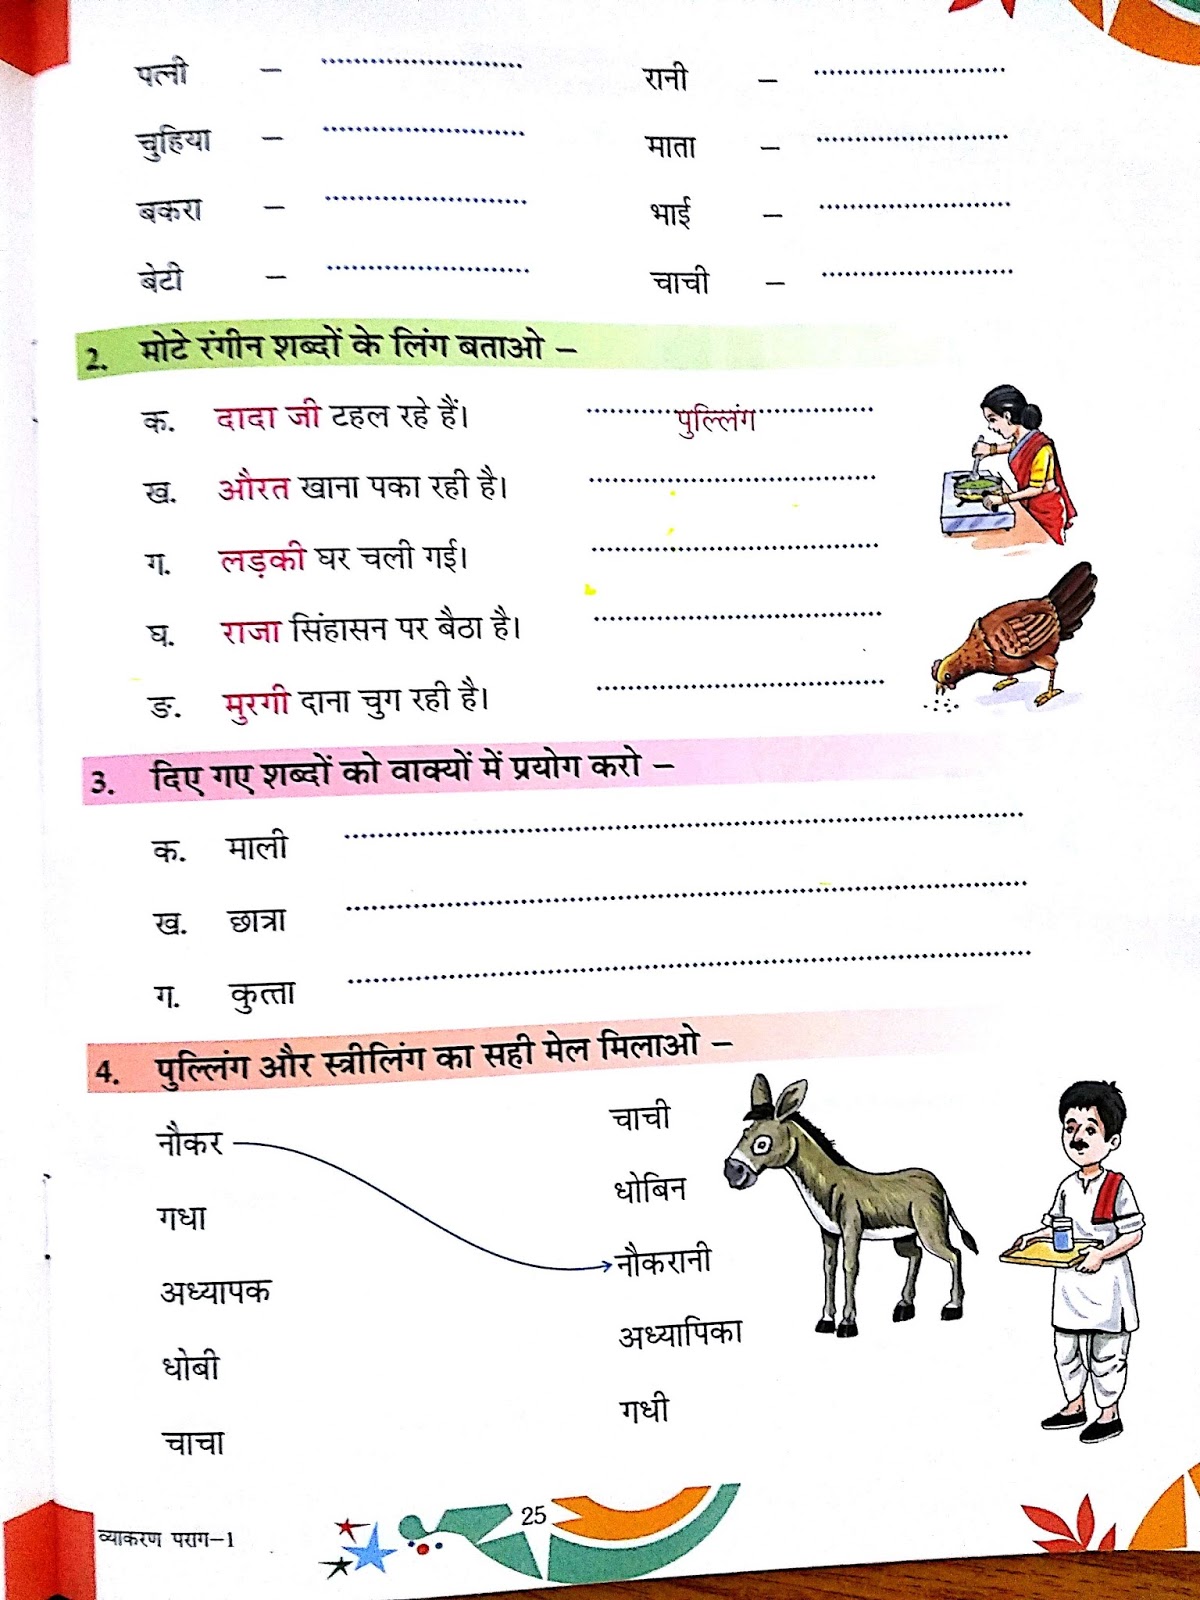 hindi-grammar-work-sheet-collection-for-classes-5-6-7-8-gender-masculine-and-feminine-work